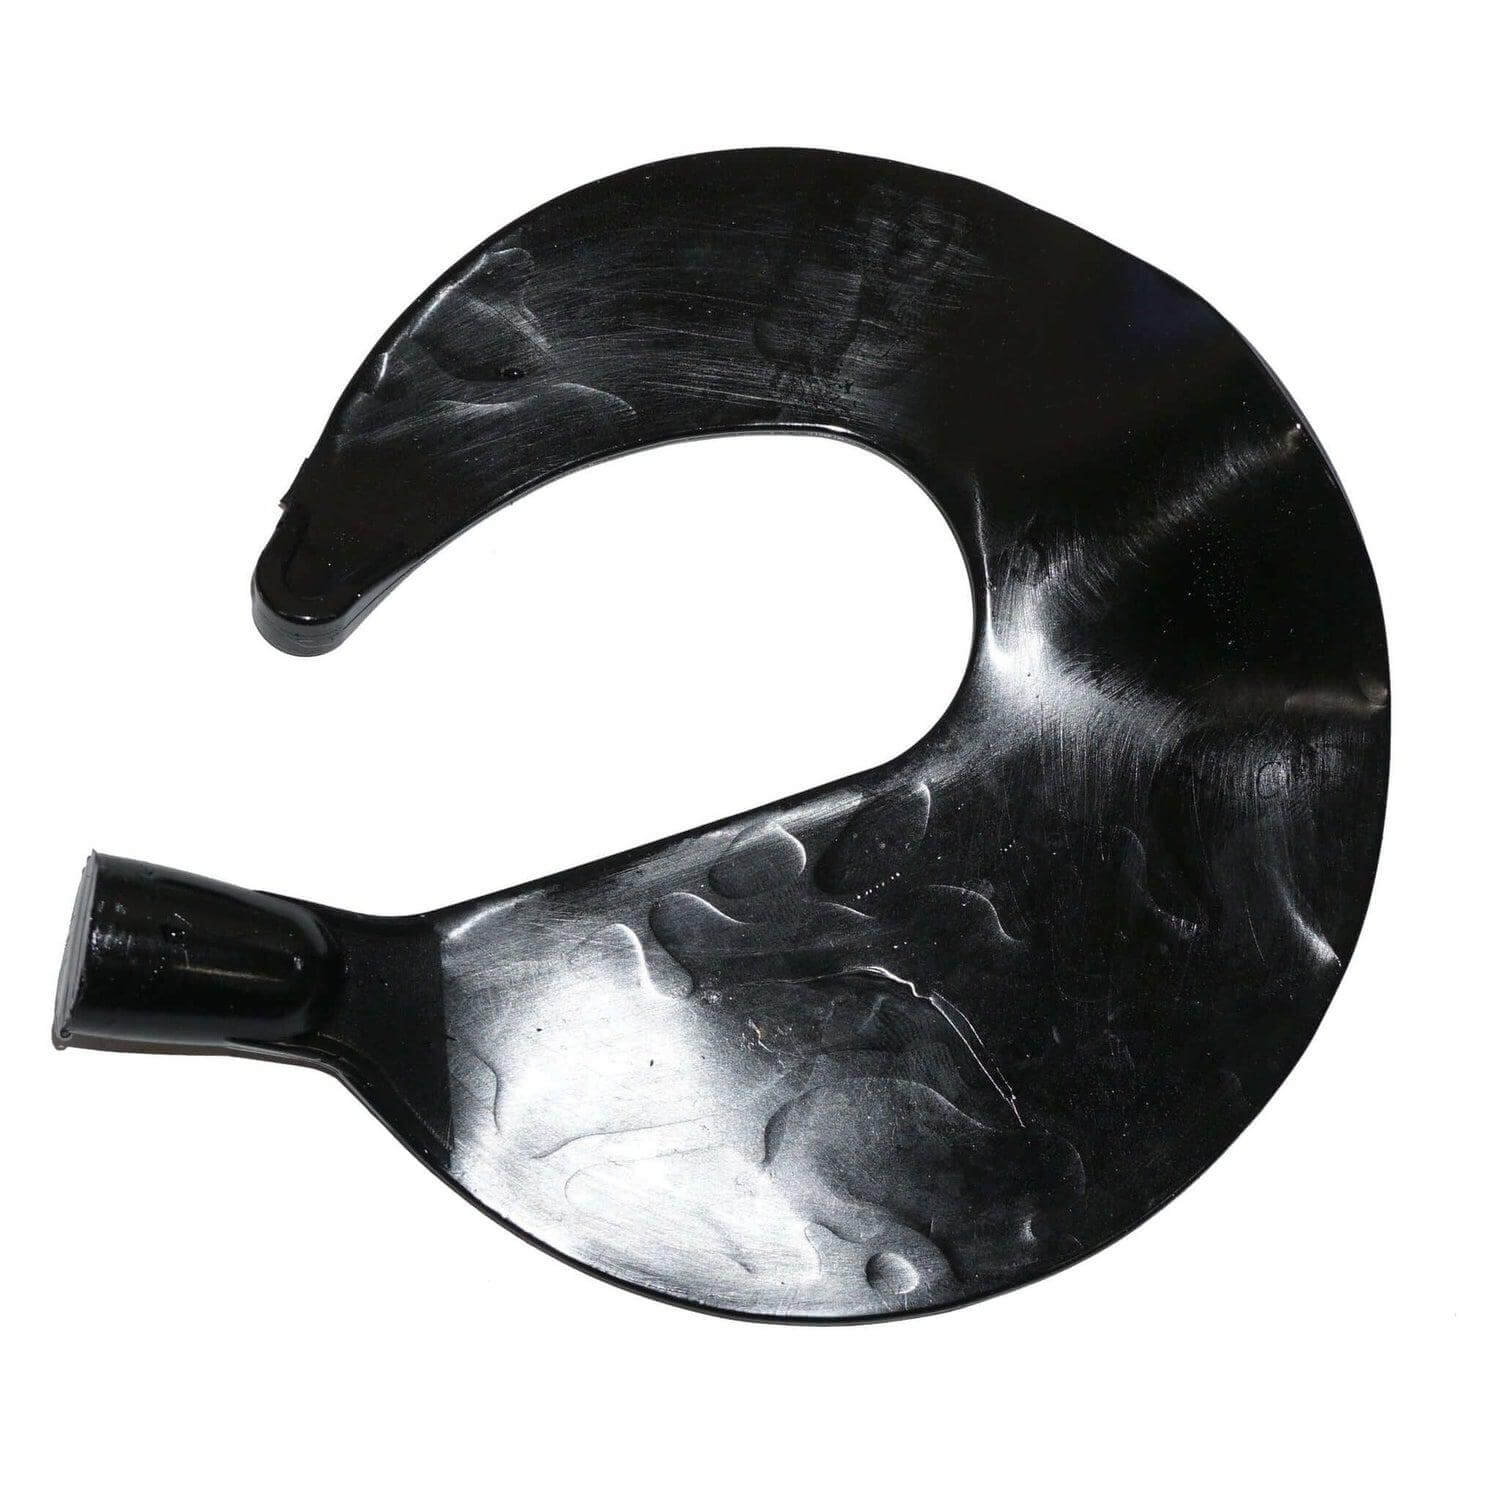 View of Lures_Add-on Whale Tail Plastics 11" Replacement Tail Black available at EZOKO Pike and Musky Shop